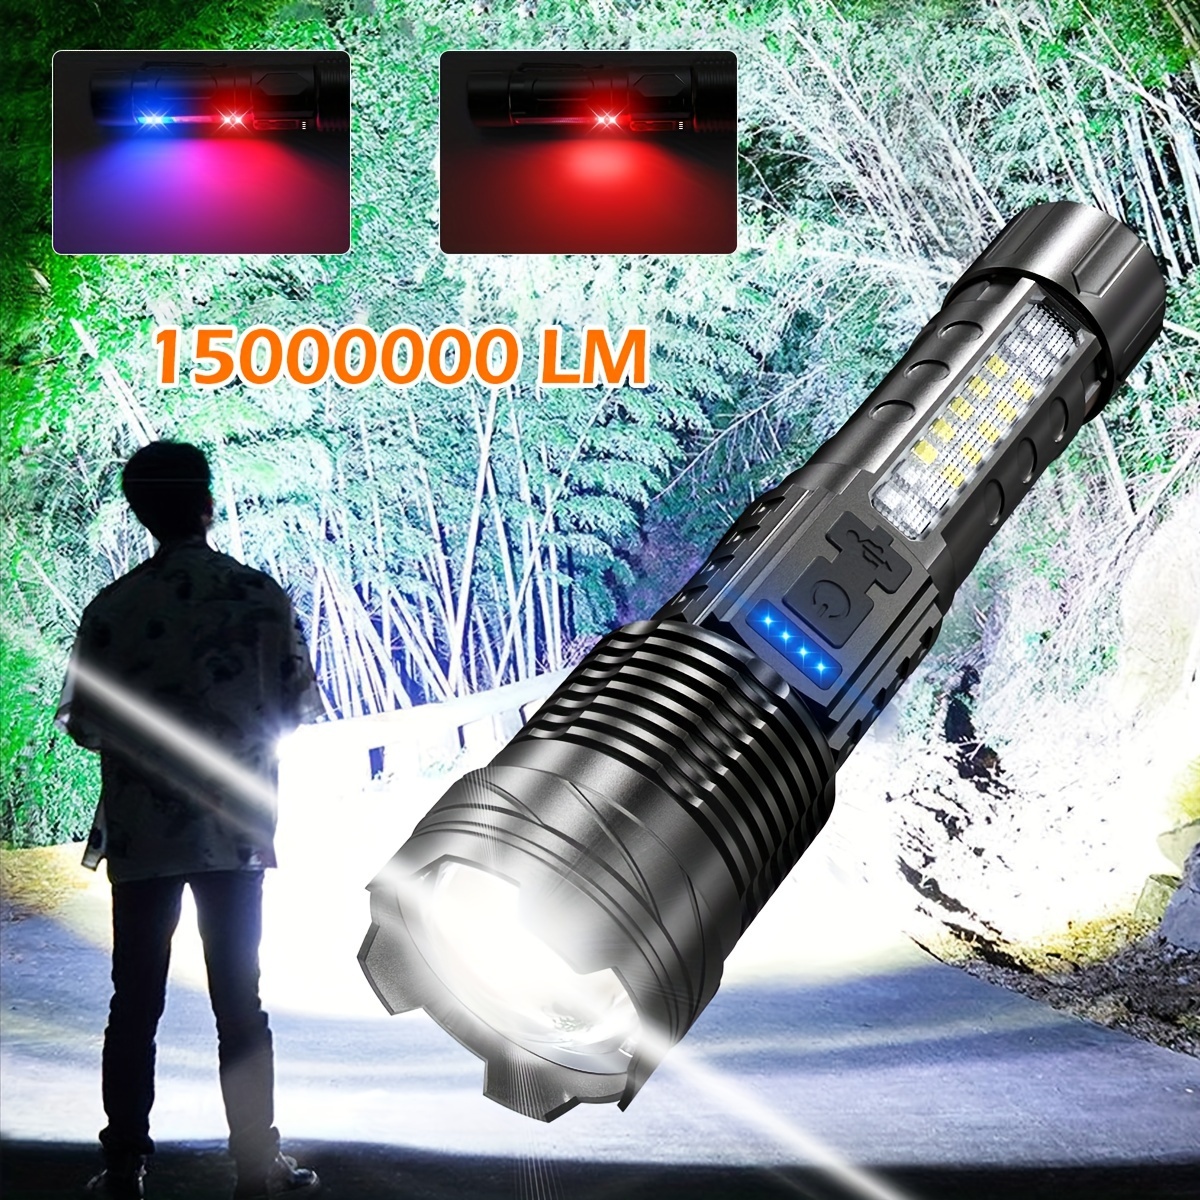 

Rechargeable Led Flashlight, Cob Work Light, 7-mode High Brightness Flashlight, Handheld Flashlight, Suitable For Emergency Situations, Camping Equipment, Hiking, Camping Ideal Choice